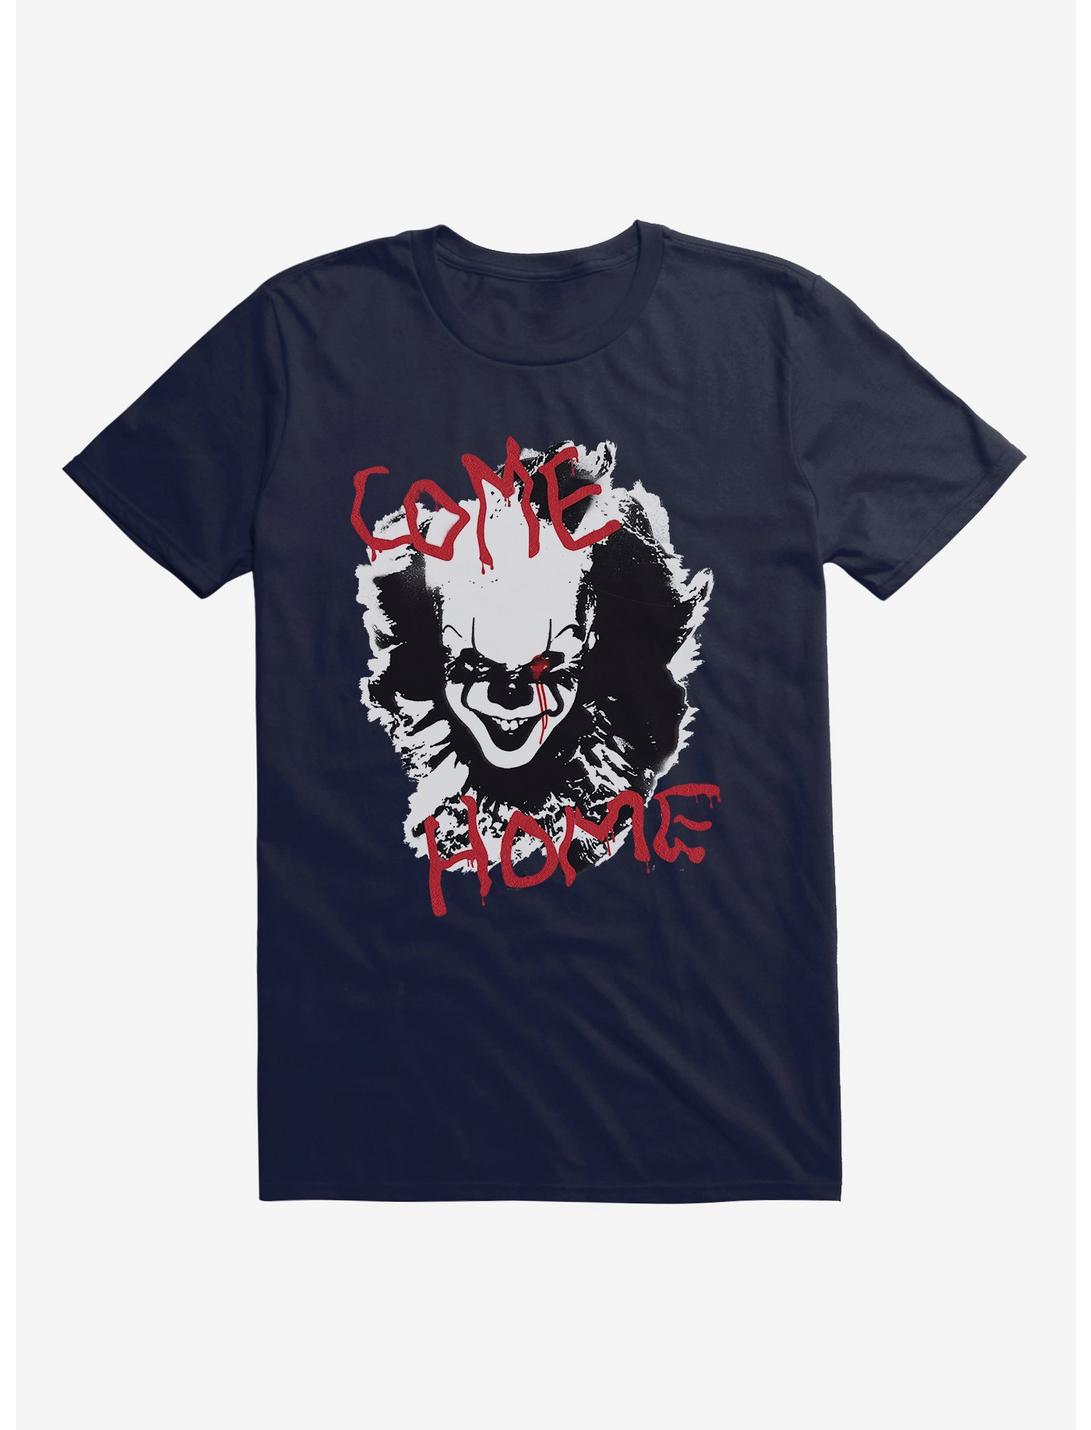 IT Chapter Two Come Home Cutout T-Shirt, NAVY, hi-res